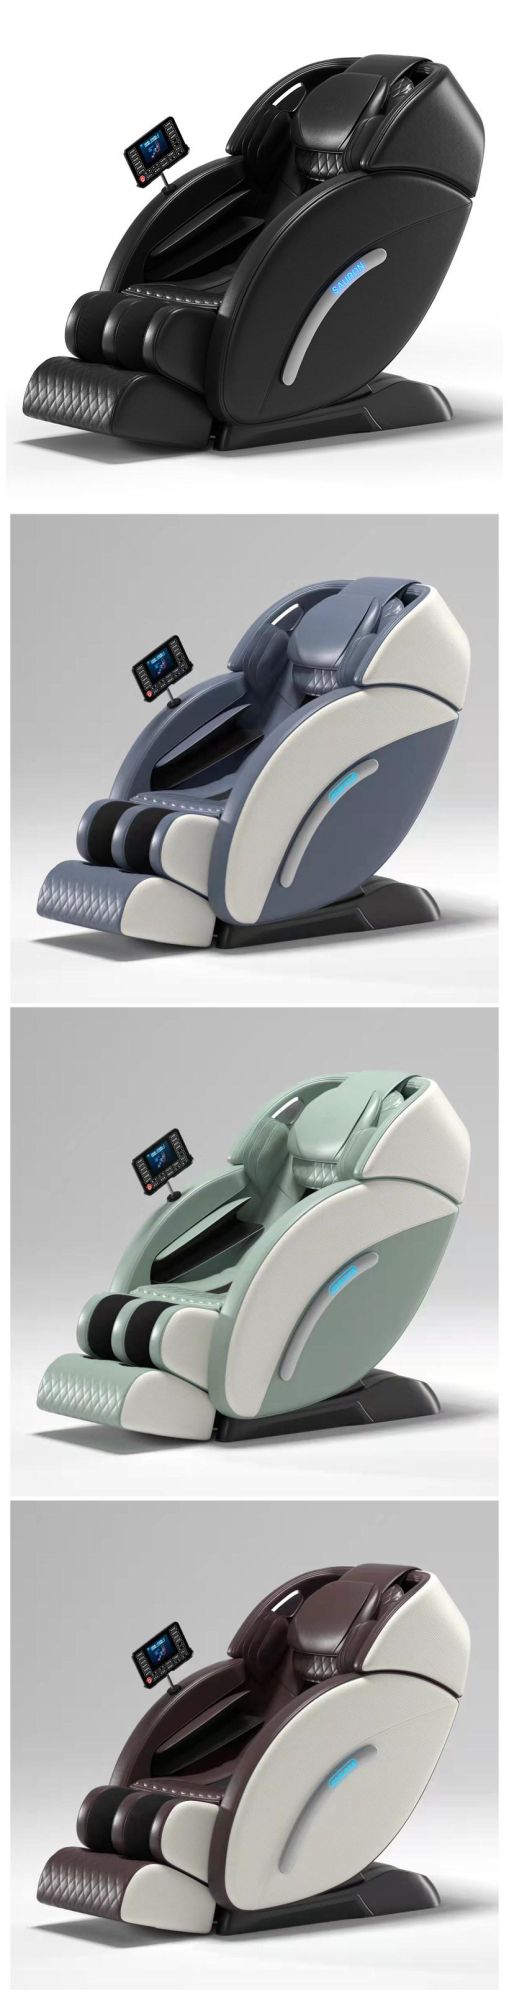 Sauron T100 3D SL Track Electric Full Body Massager Massage Chair